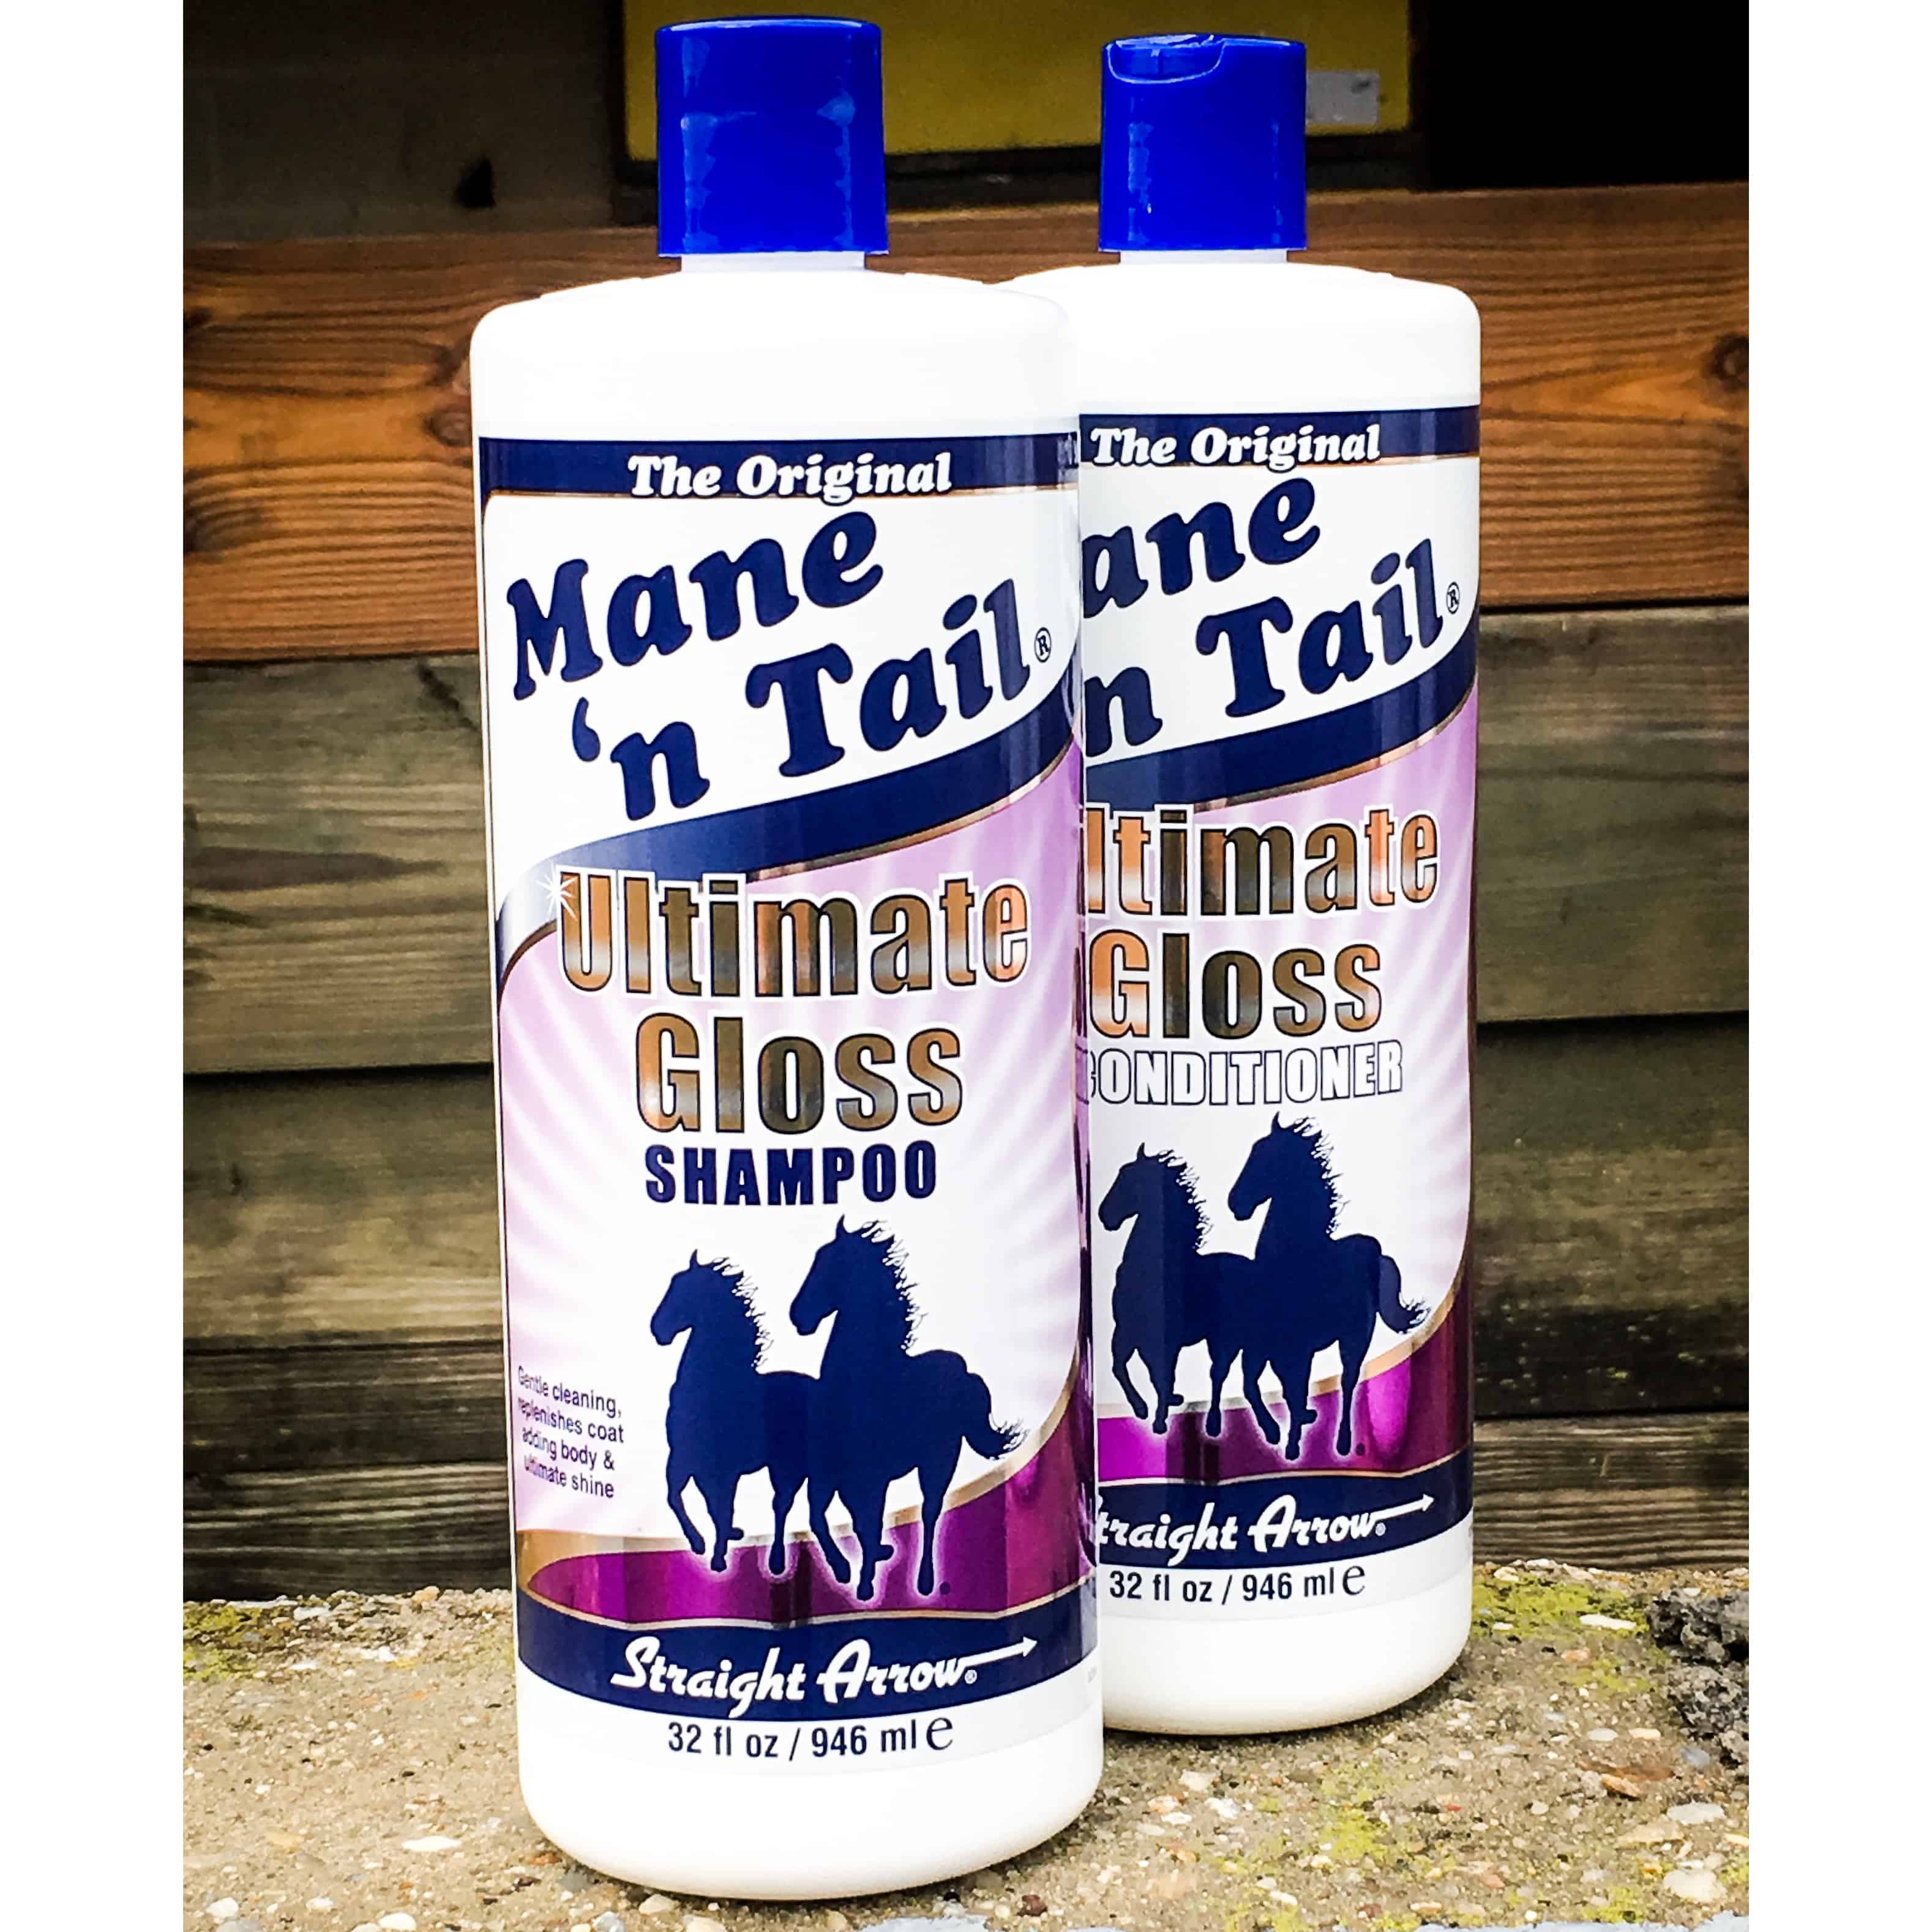 Mane 'n Tail Ultimate Gloss Shampoo and Conditioner